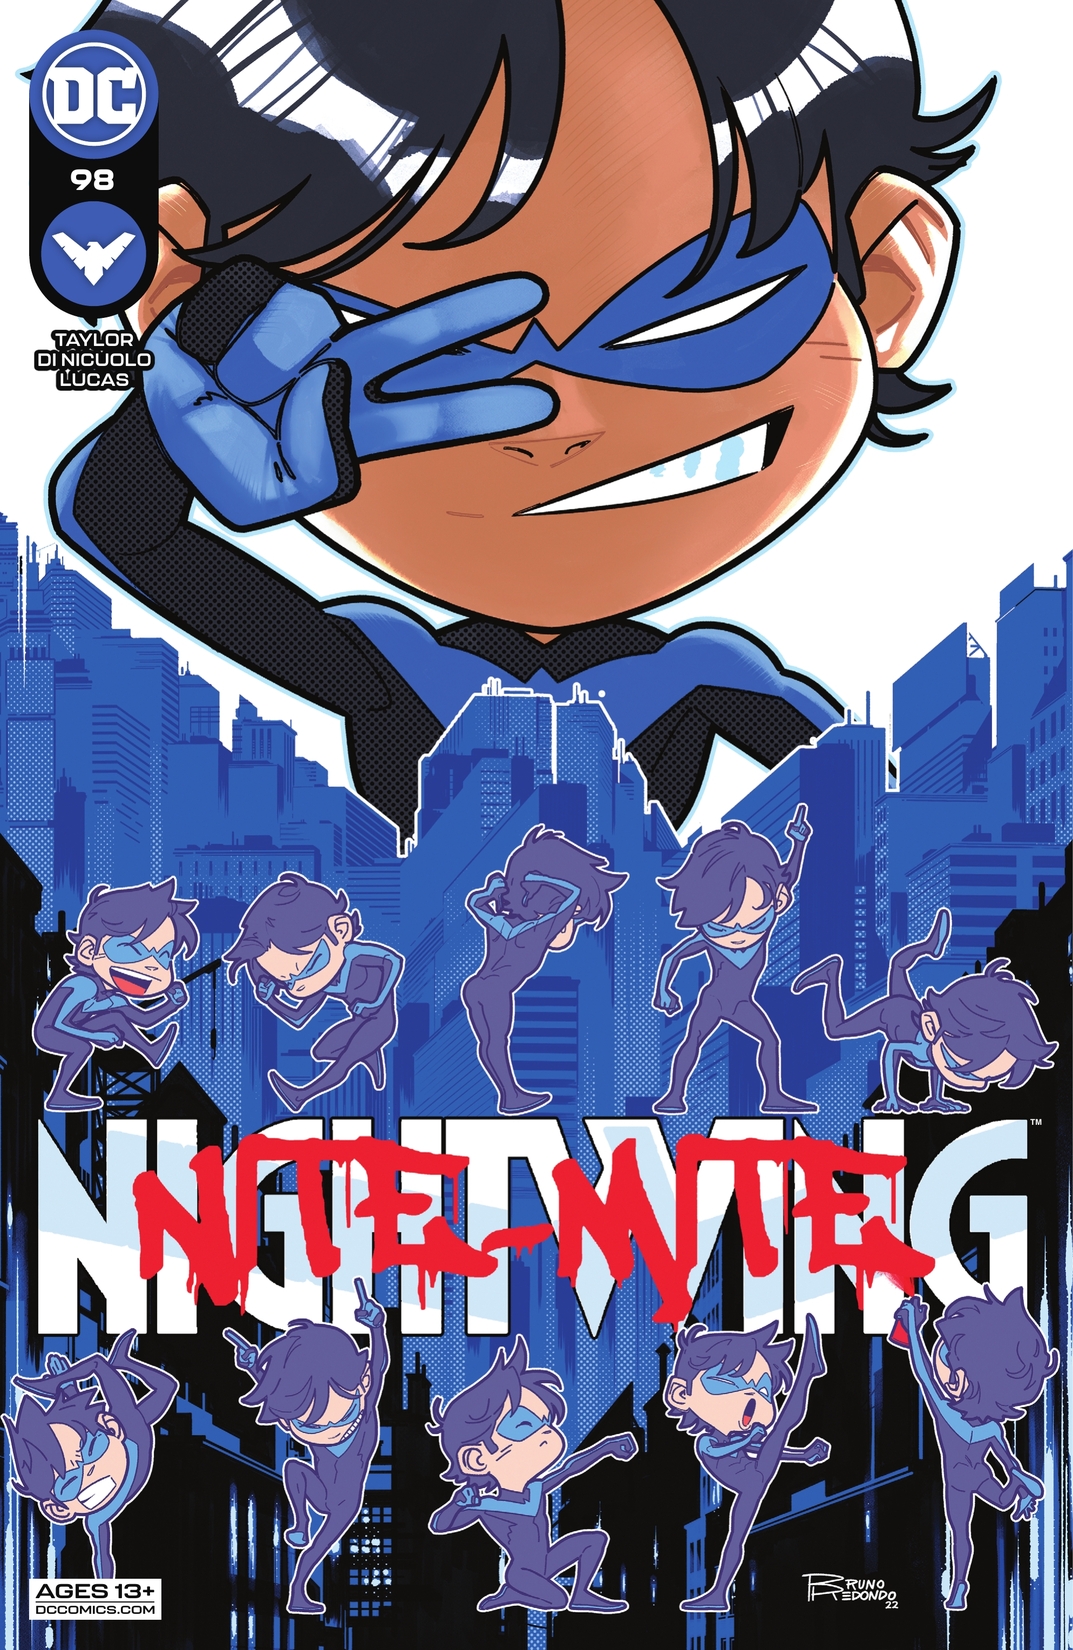 Nightwing (2016-) #98 preview images